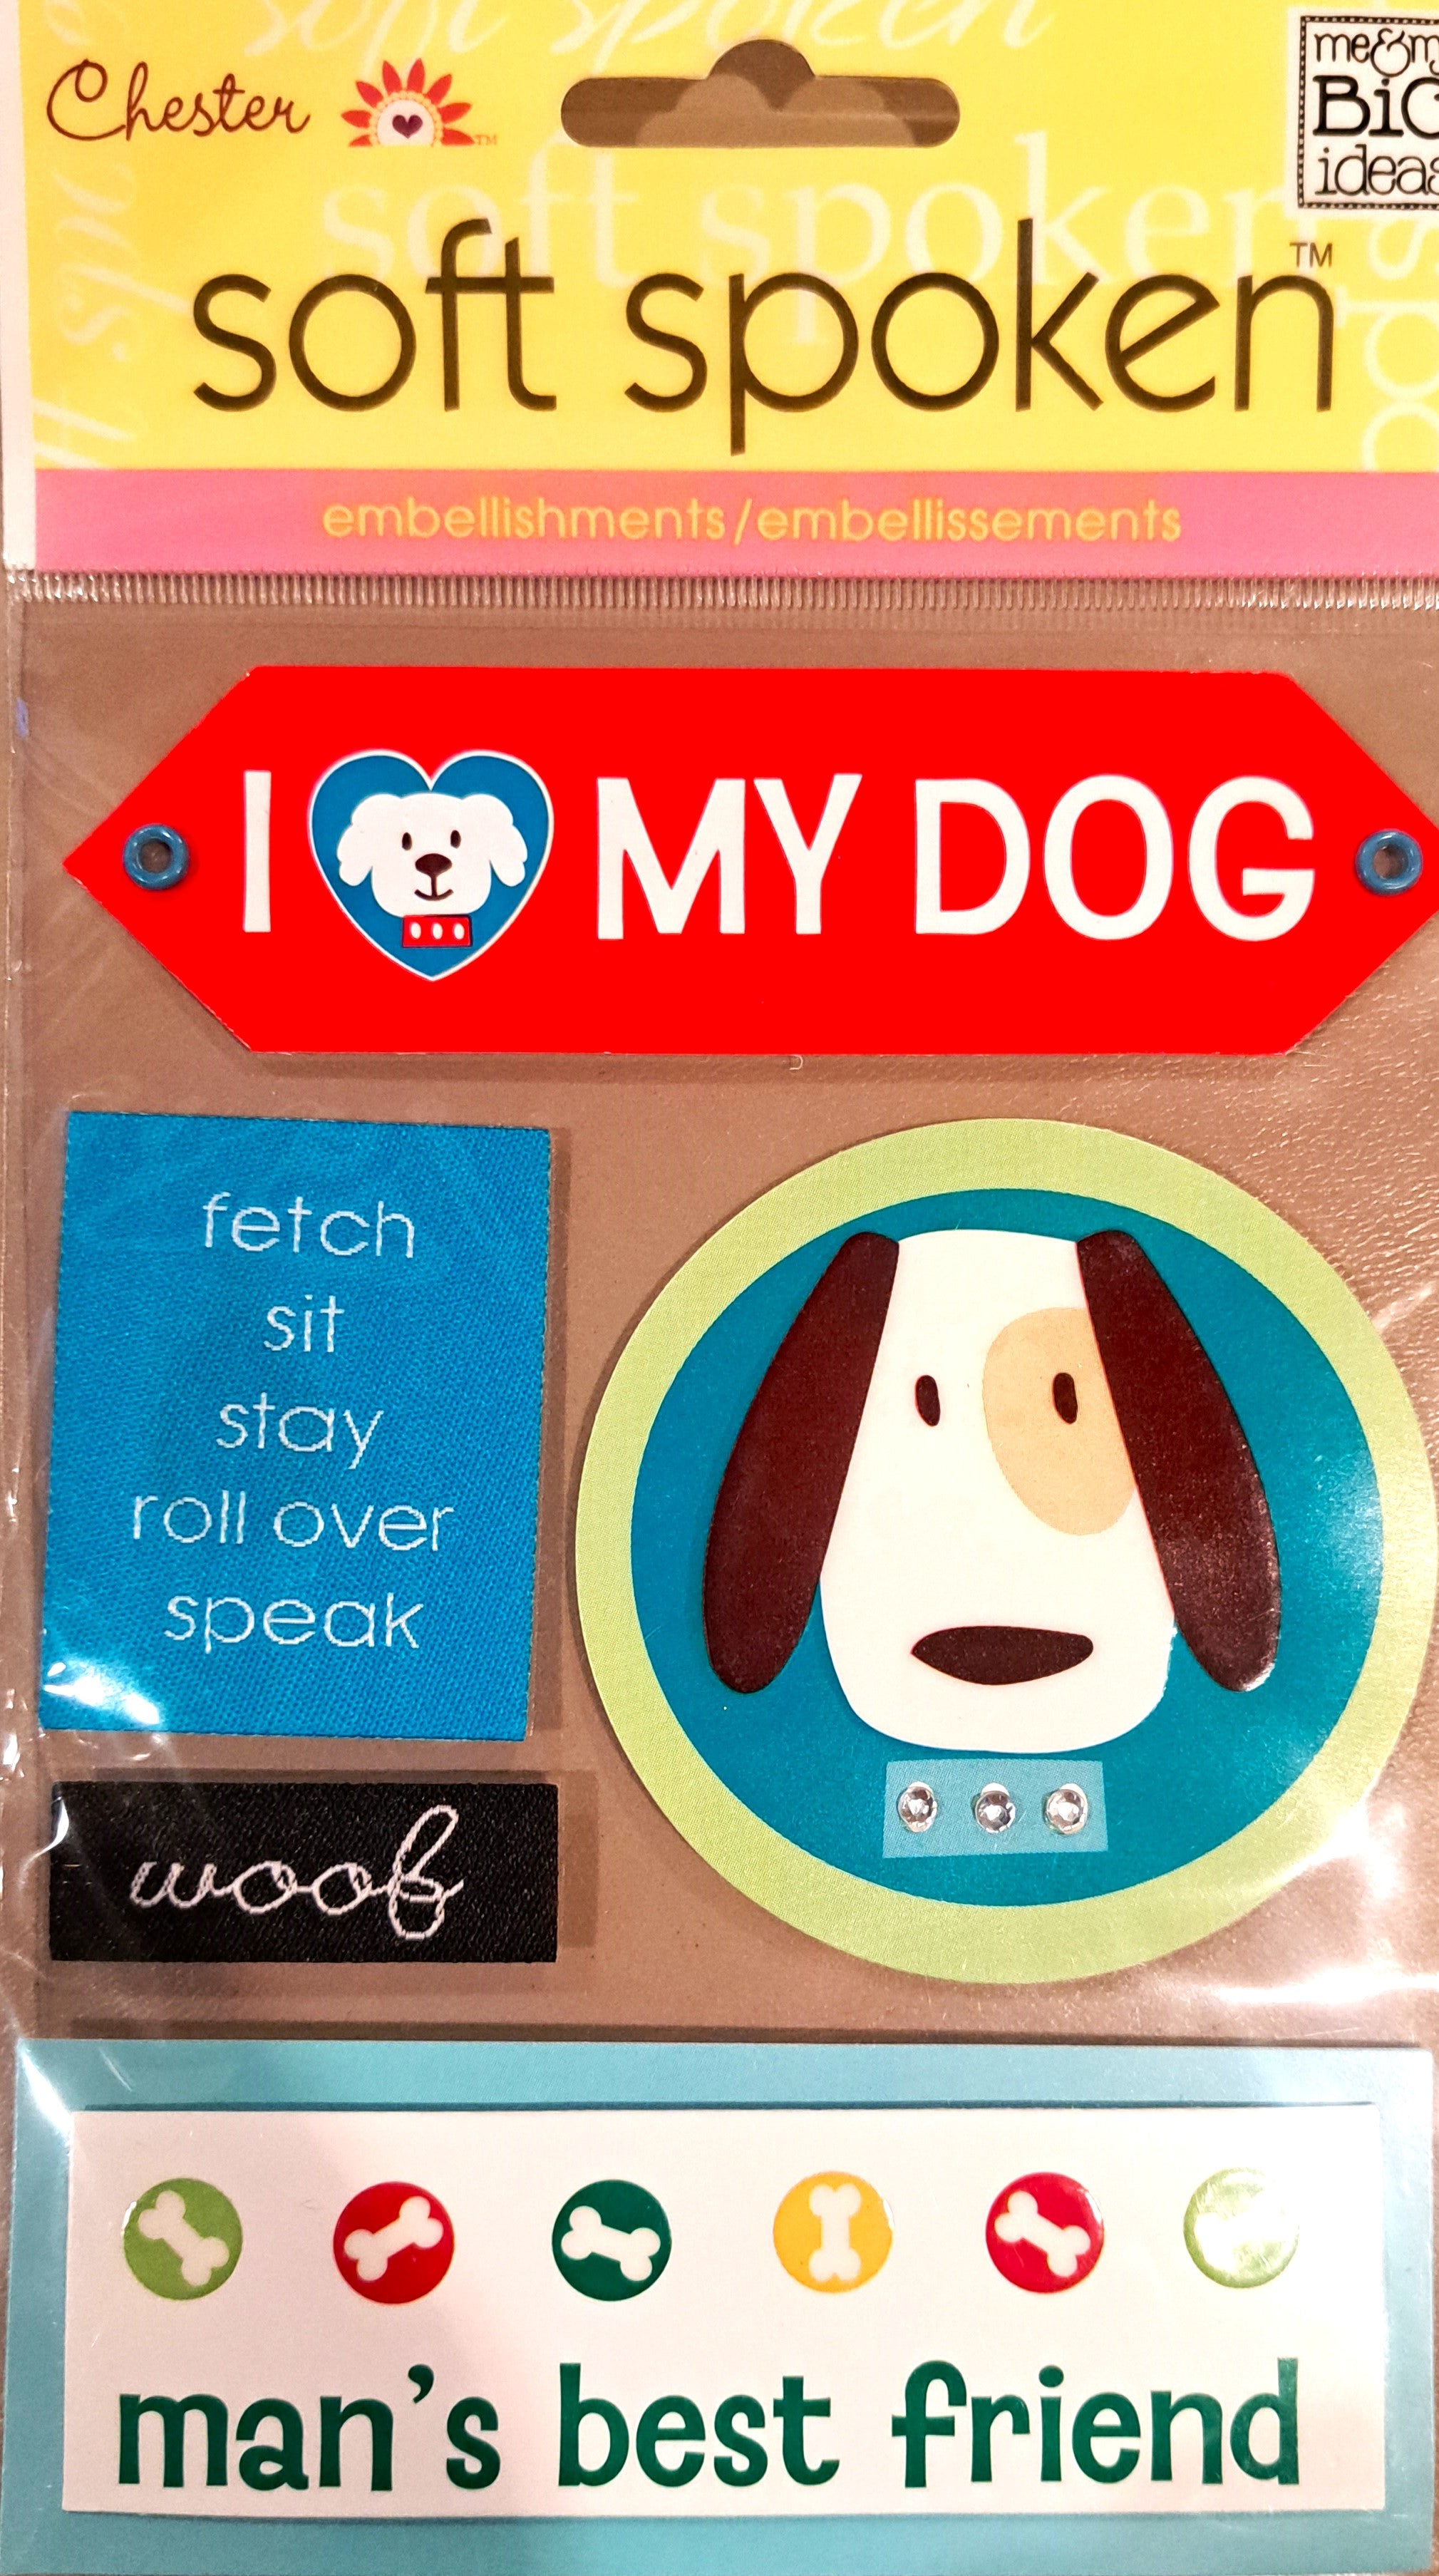 Me & My Big Ideas Soft Spoken Chester Dog Dimensional Stickers